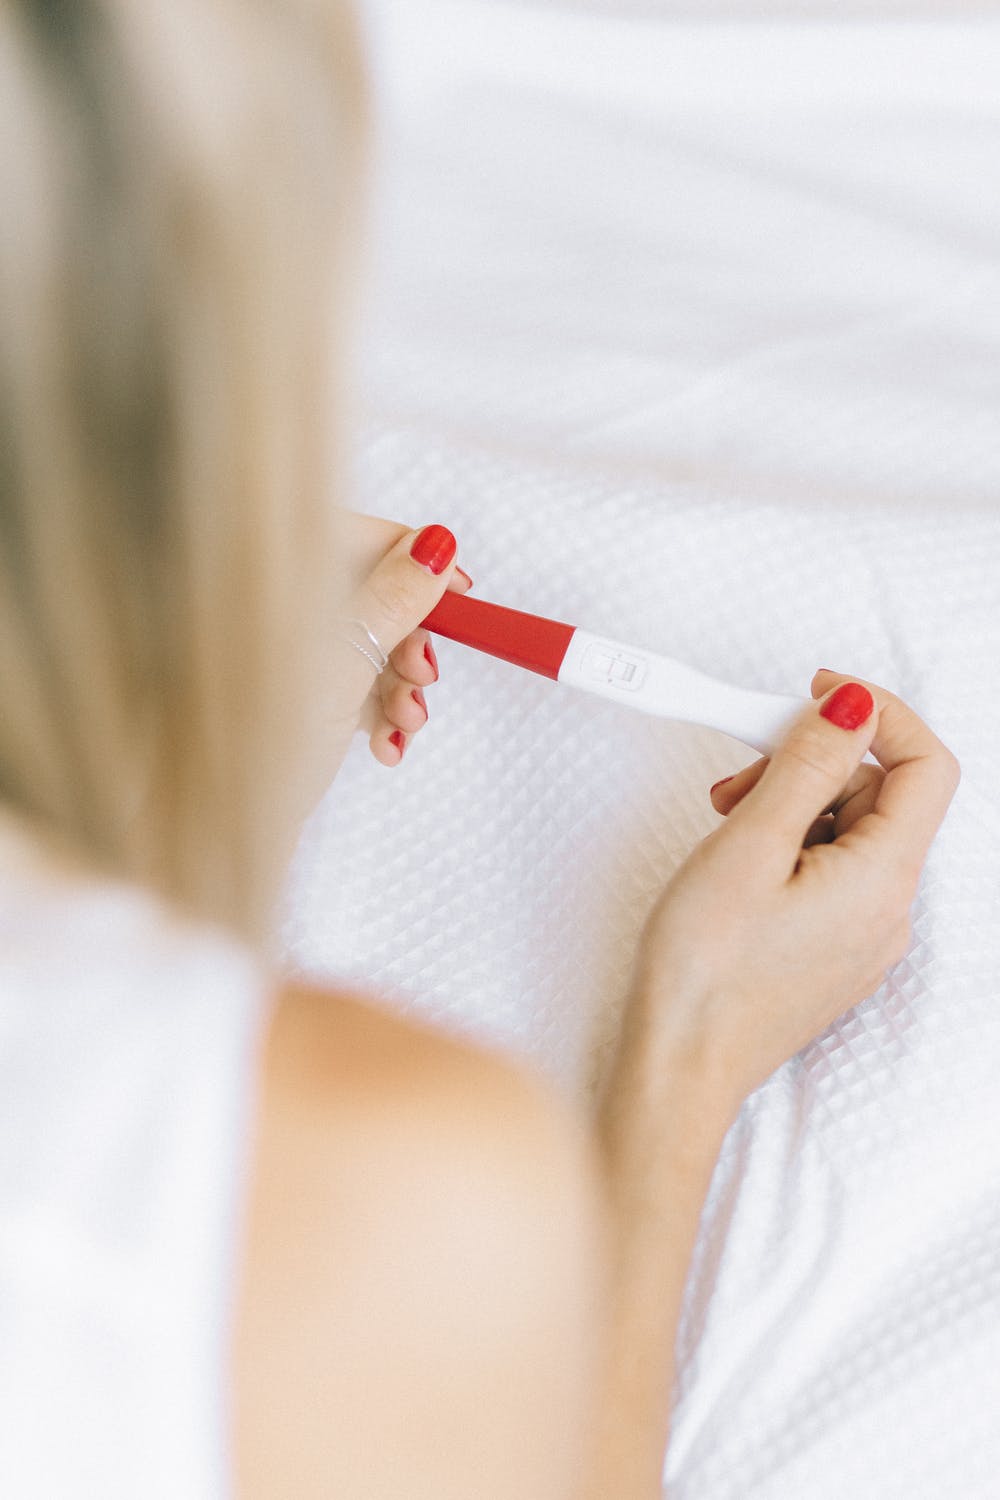 Girl with a pregnancy test | Source: Pexels